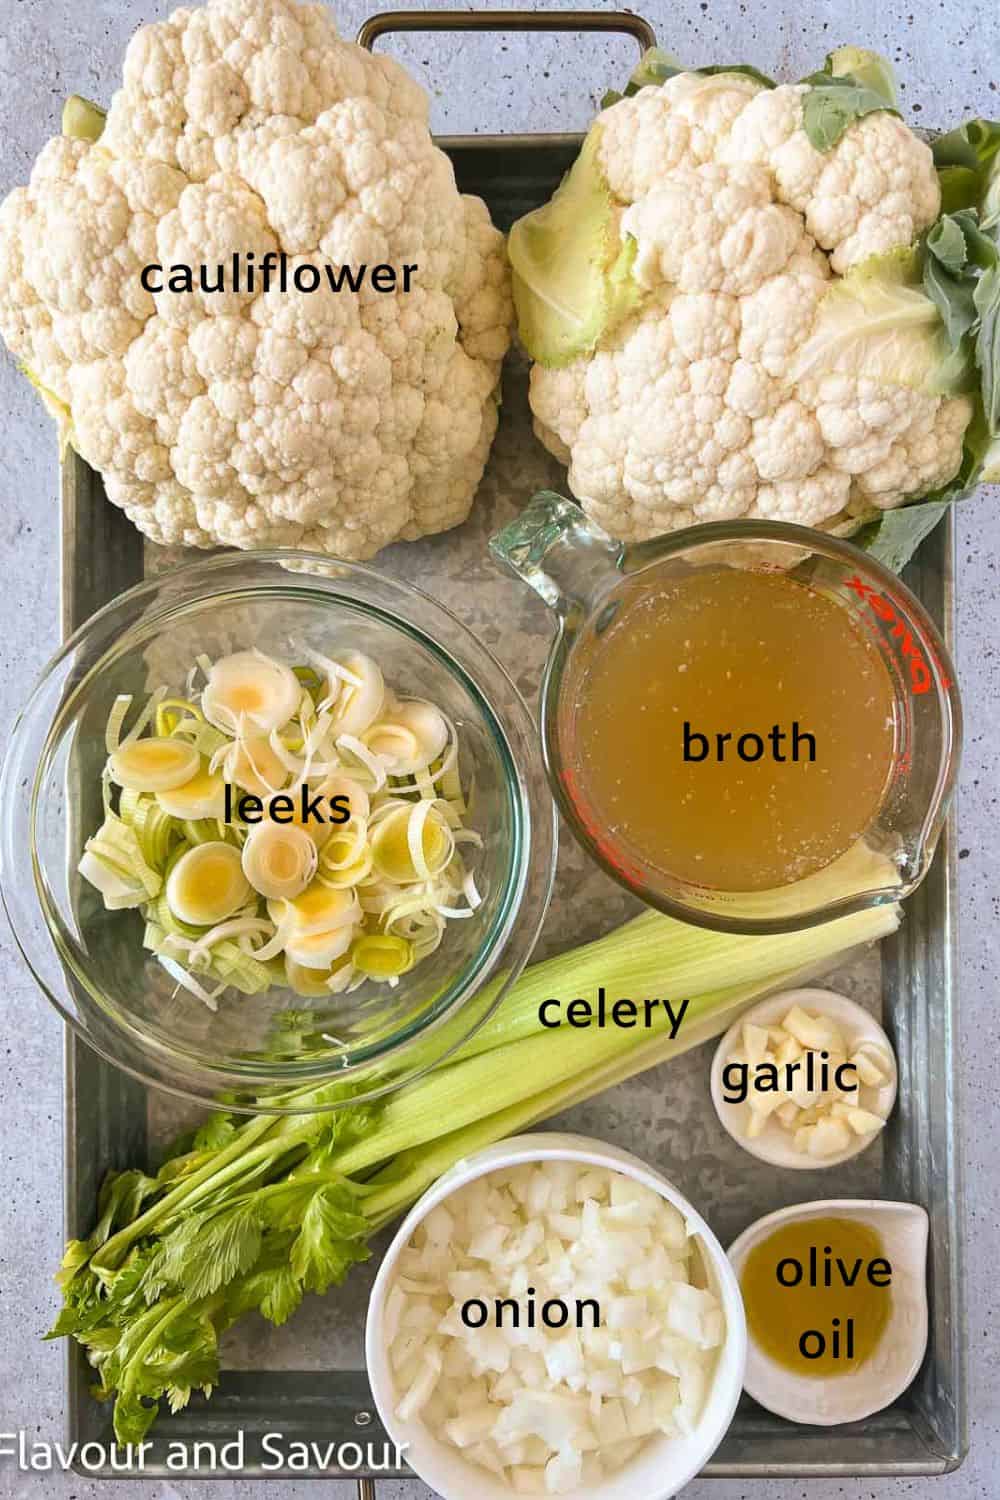 Labelled ingredients for cauliflower soup: cauliflower, leeks, broth, celery, garlic, onion, and olive oil.